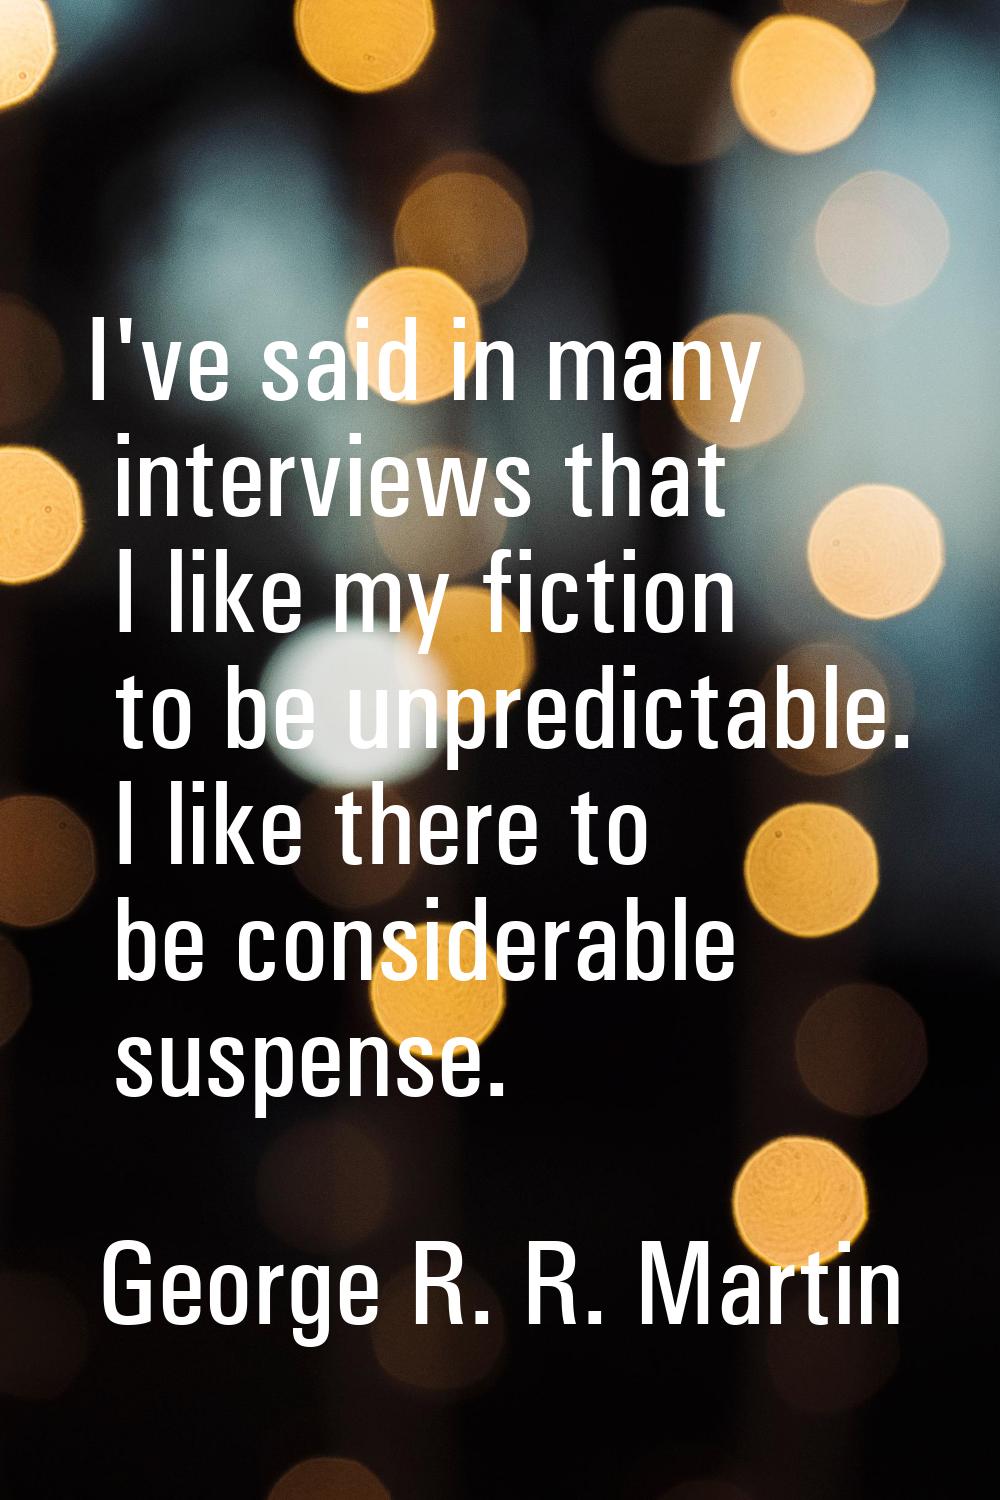 I've said in many interviews that I like my fiction to be unpredictable. I like there to be conside